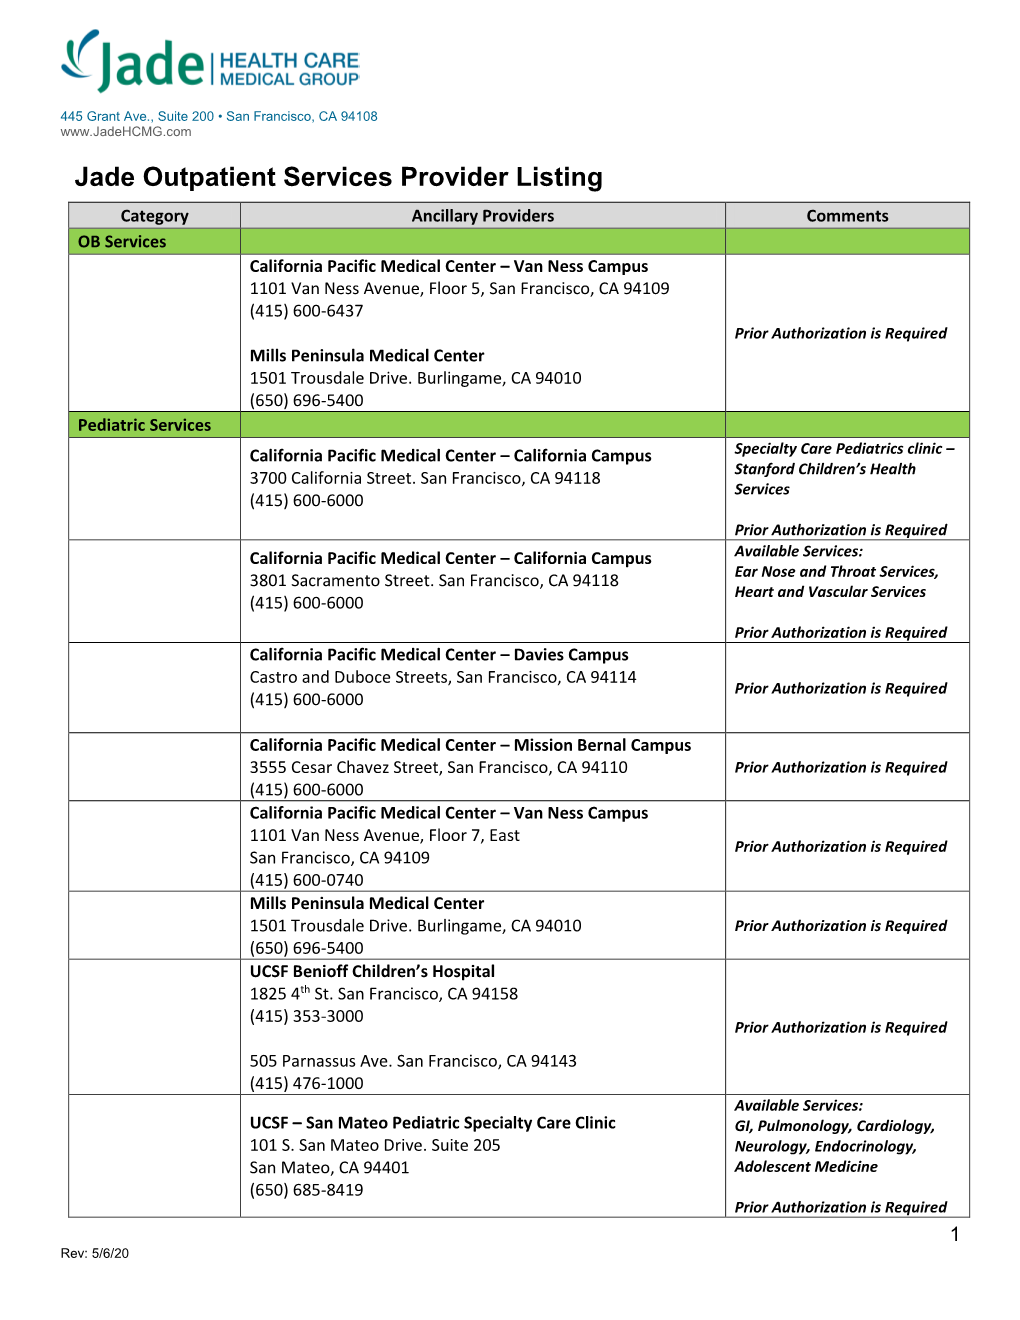 Jade Outpatient Services Provider Listing